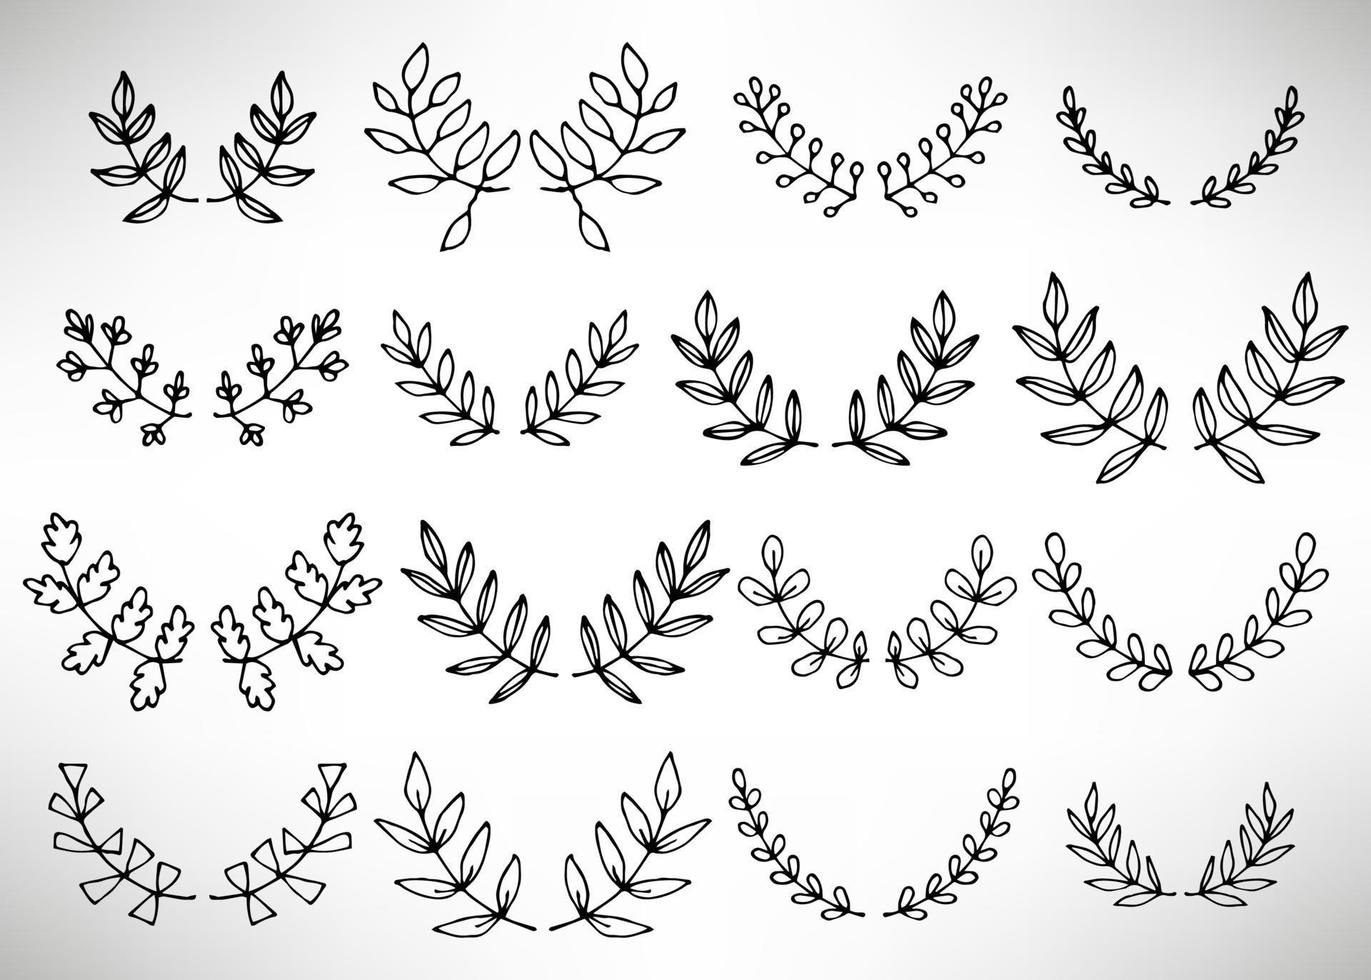 Black thin line wreath of hand drawn branches and leaves isolated on white background. Floral round frame. Laurel. vector